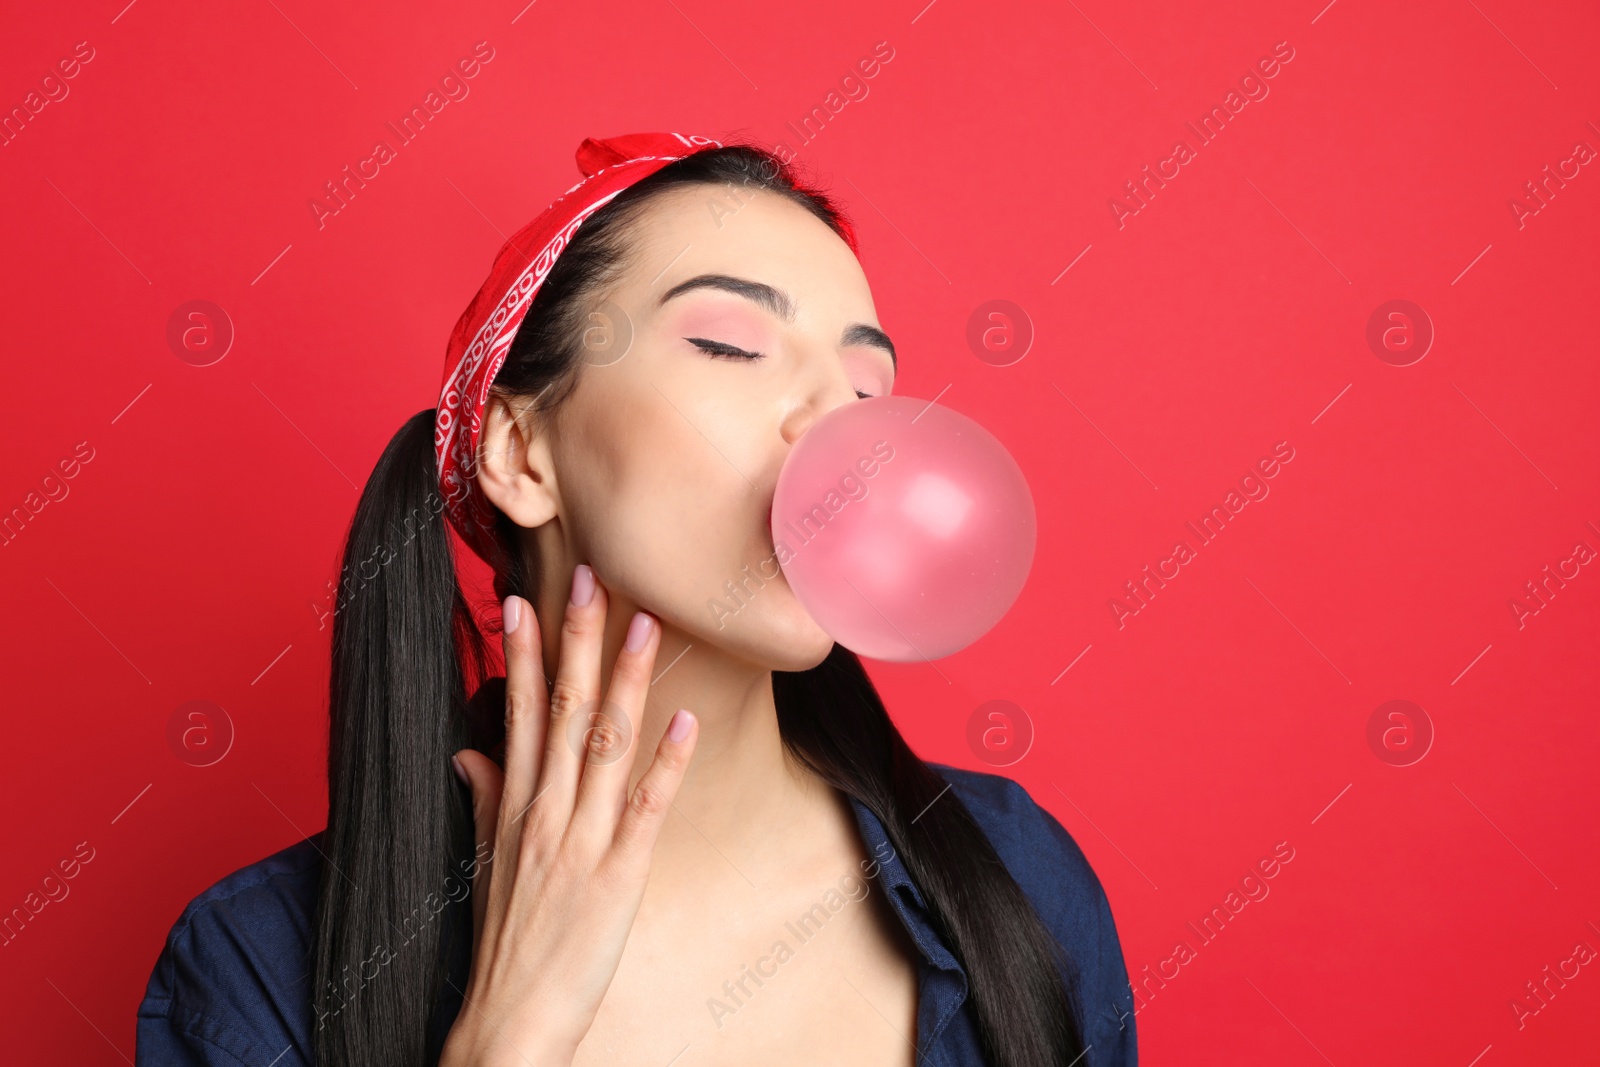 Photo of Fashionable young woman in pin up outfit blowing bubblegum on red background, space for text